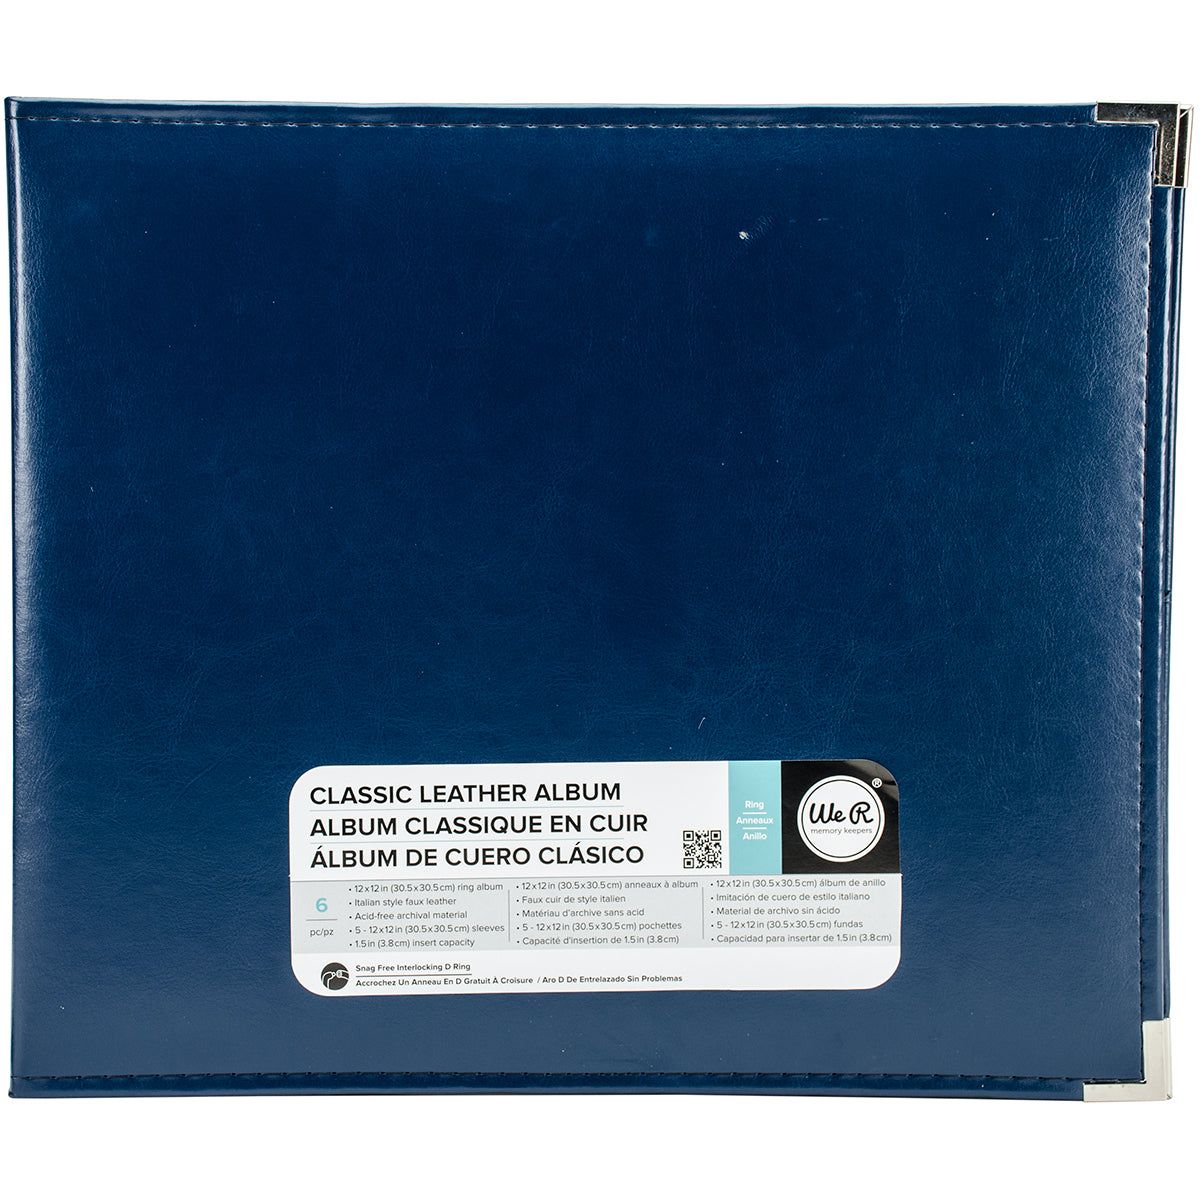 REMEMBER Sewn Leatherette 3-Ring 12x12 Binder (unfilled) by